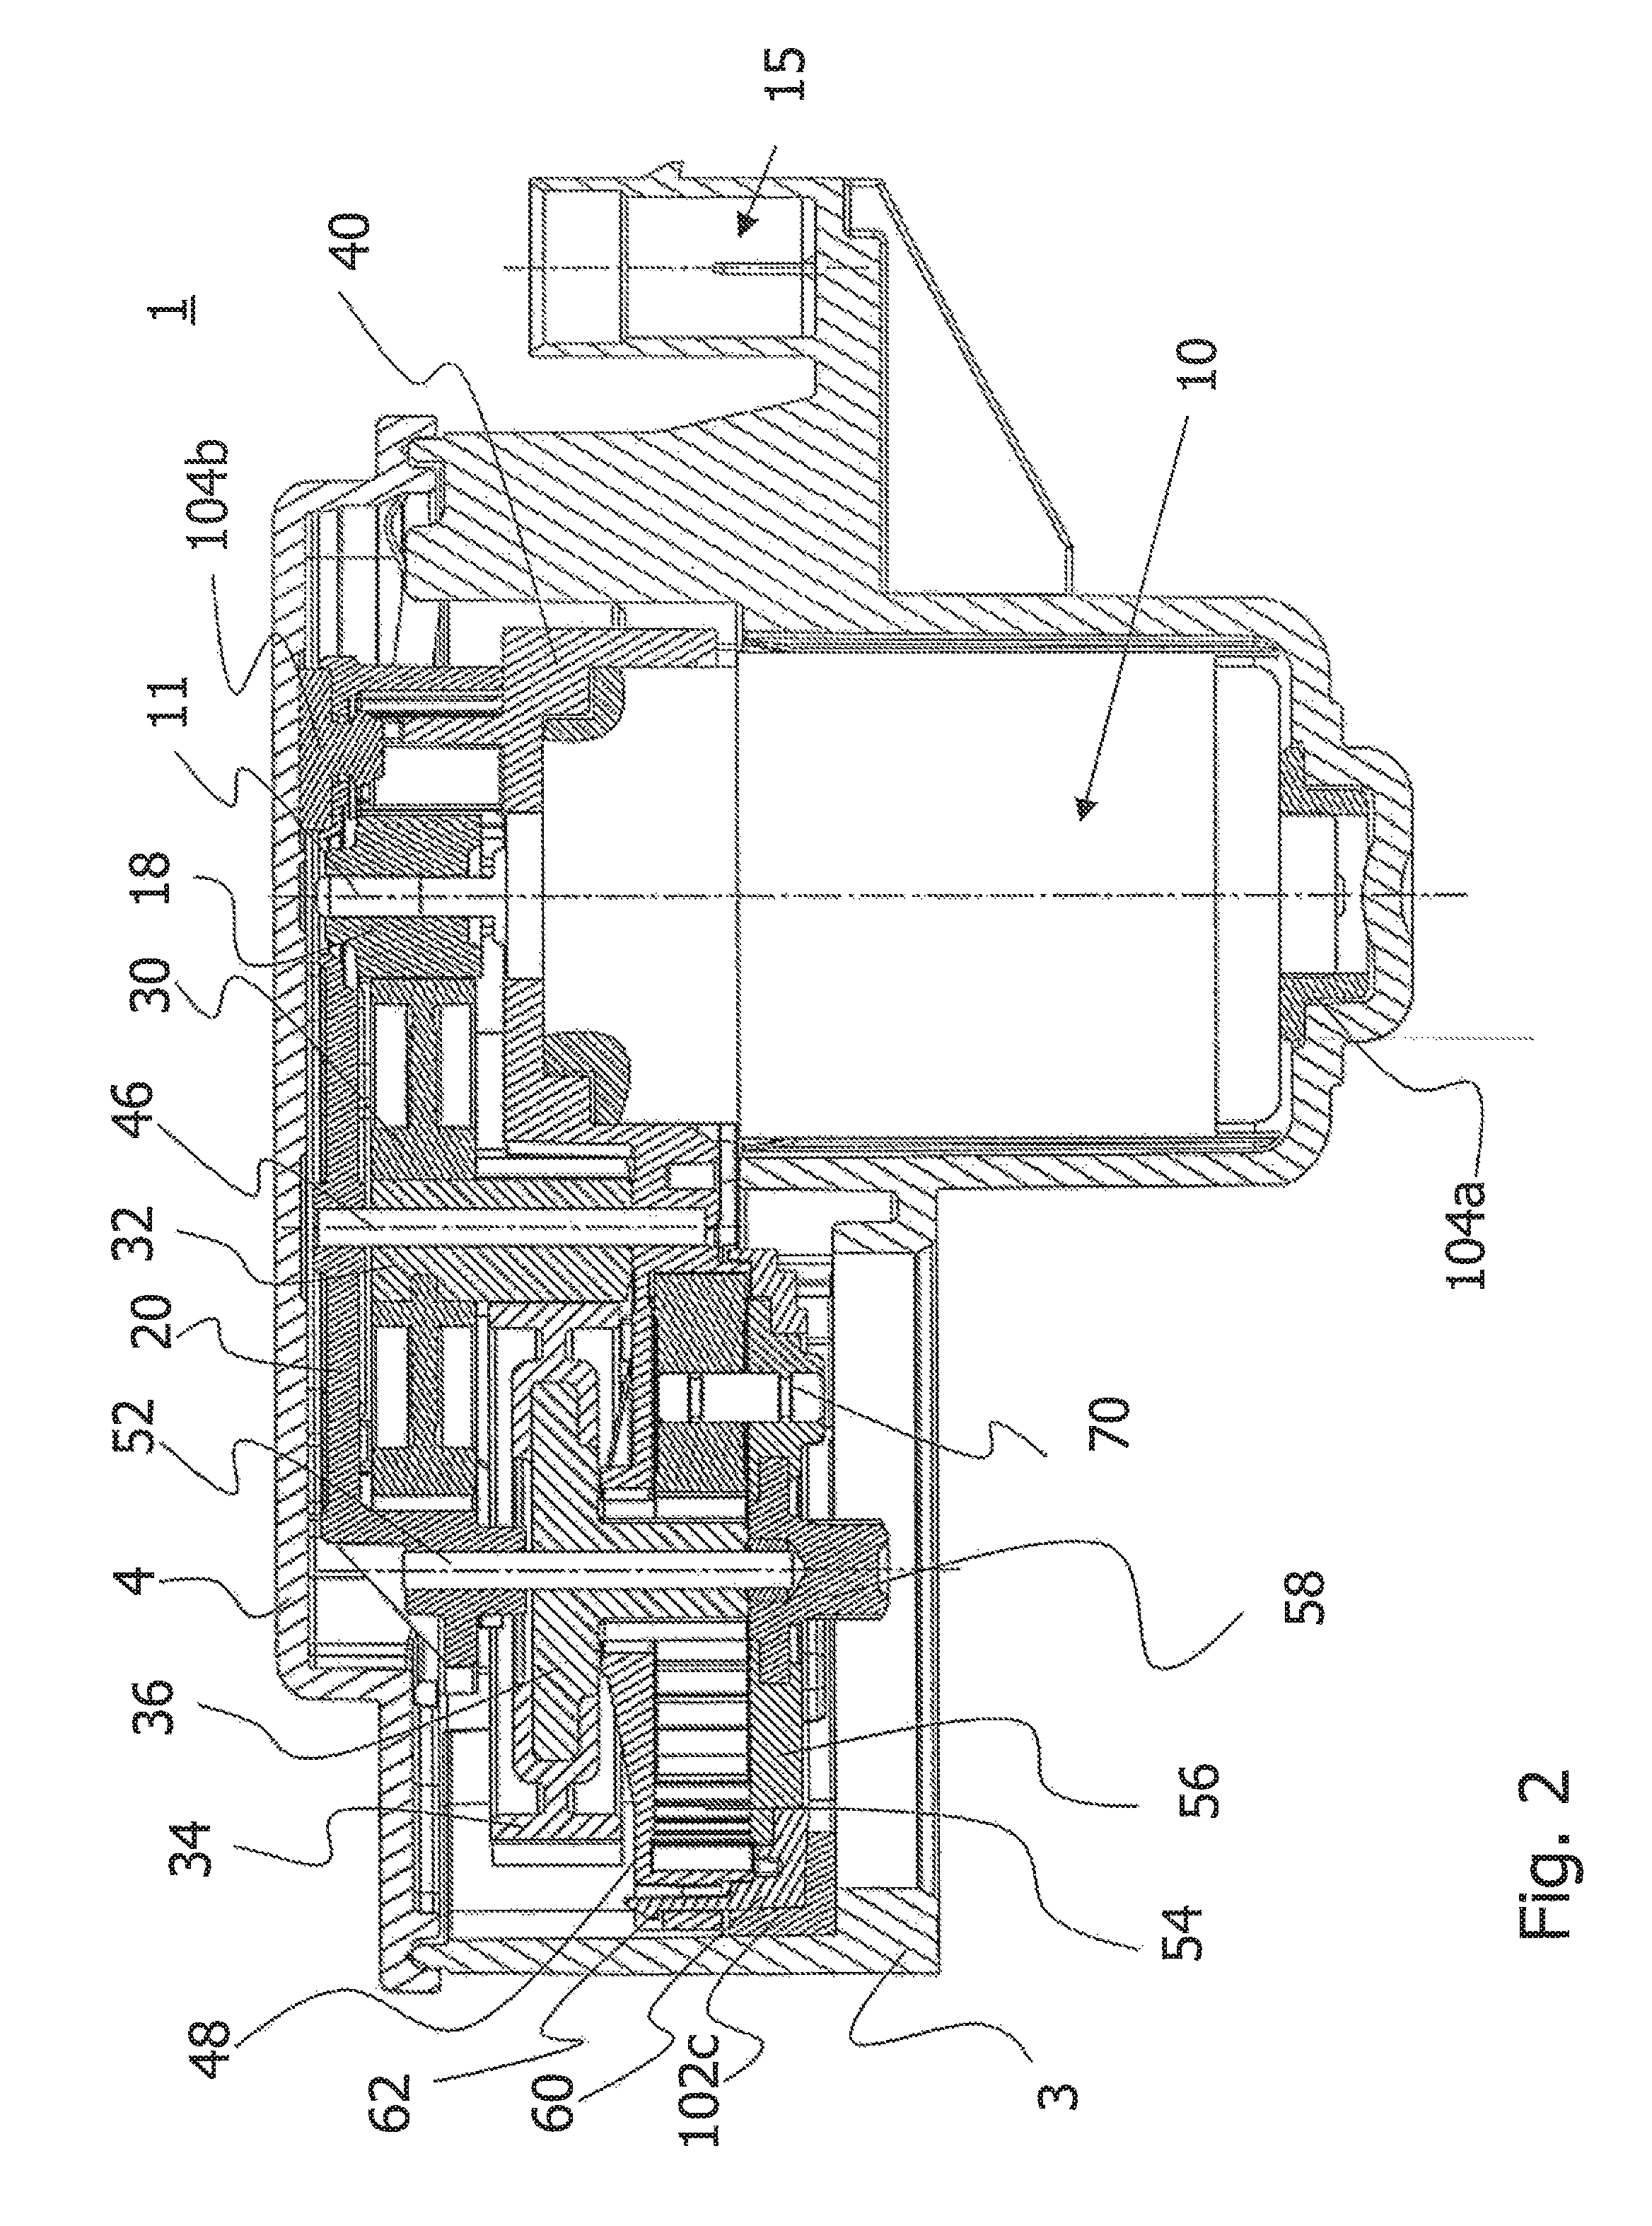 Sub-assembly for an electromechanical brake actuator